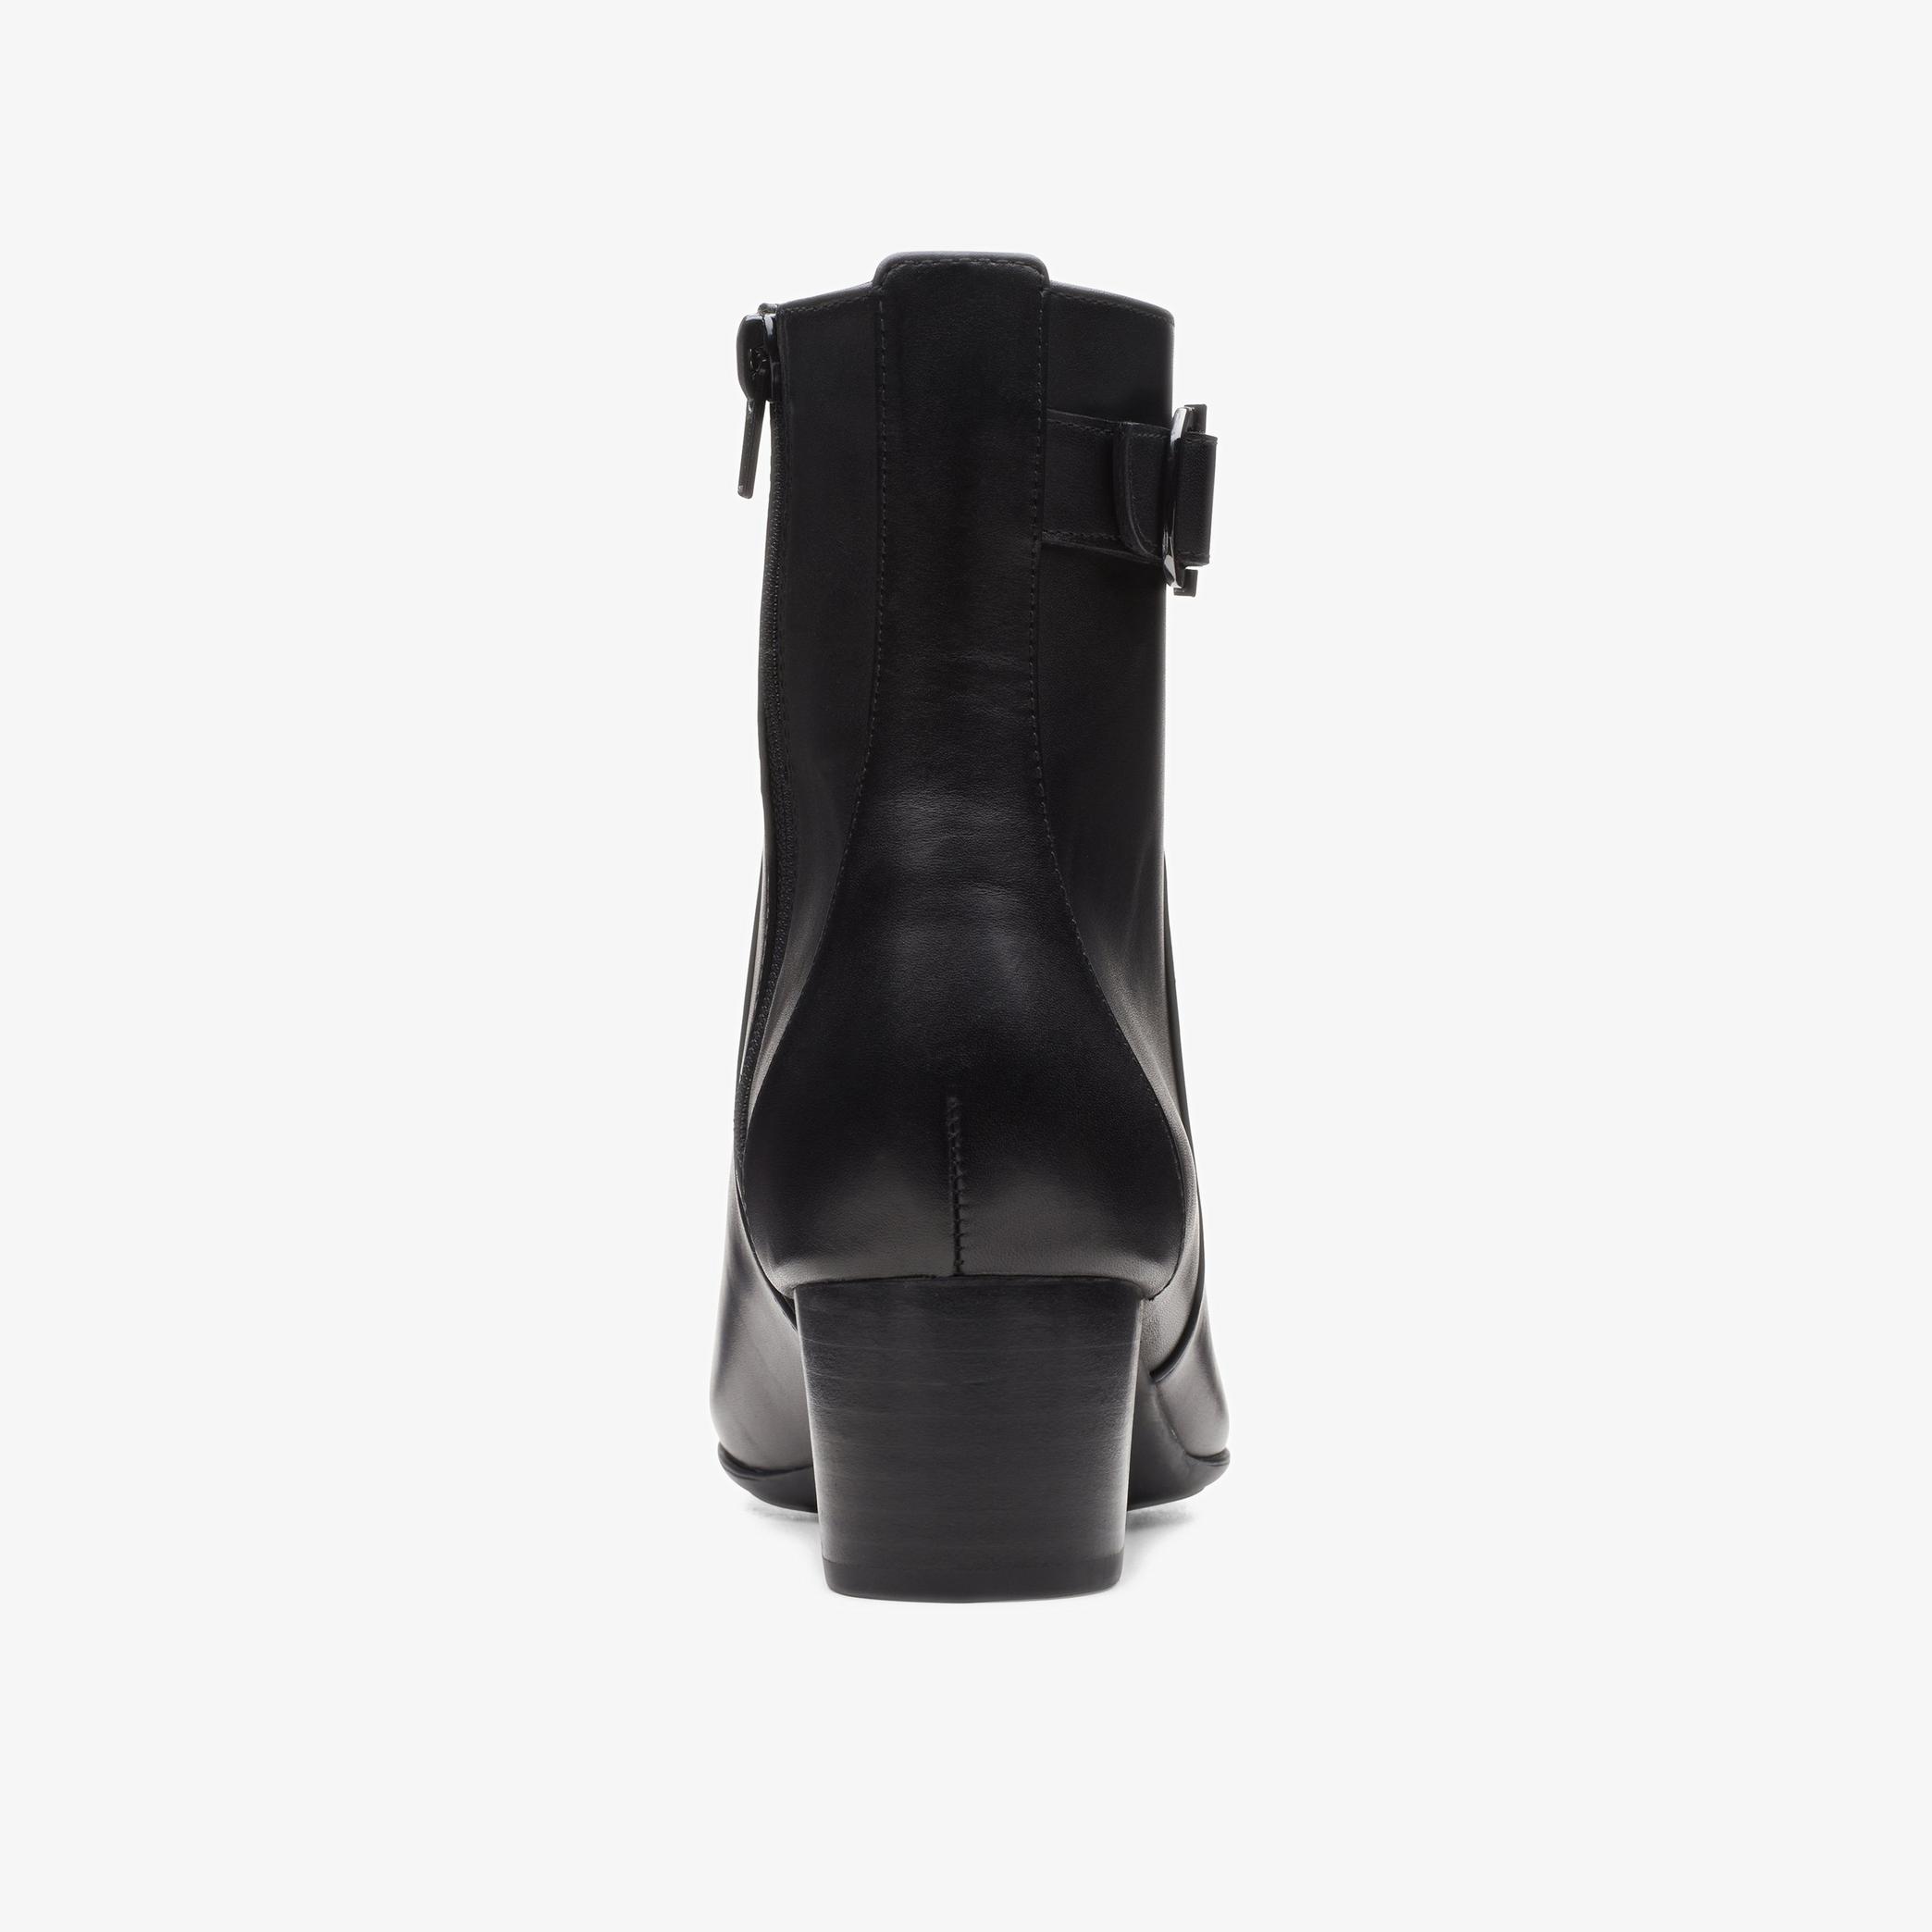 Linnae Up Black Leather Ankle Boots, view 5 of 6